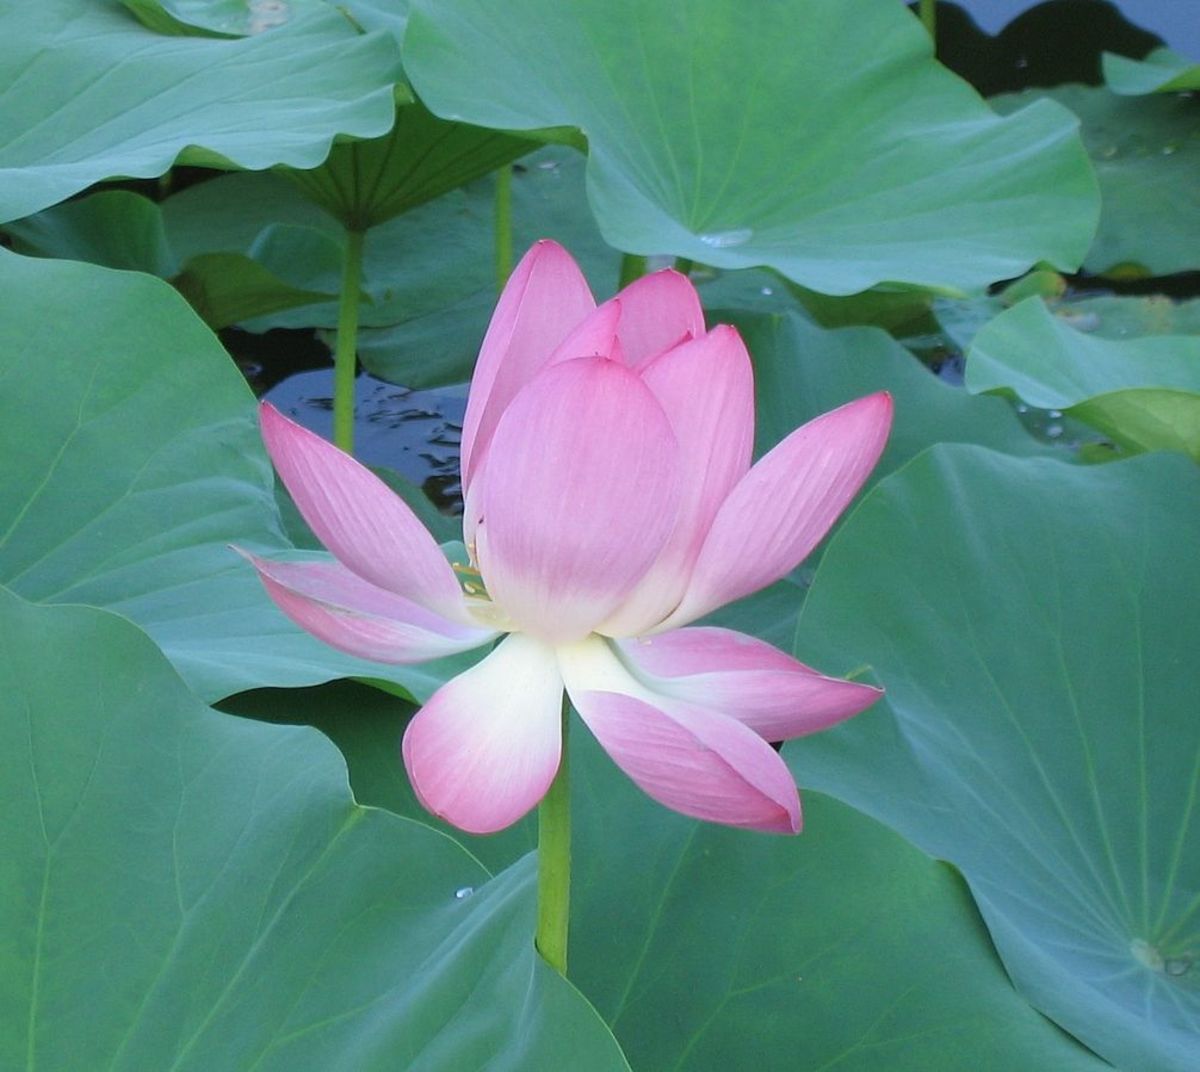 The Lotus Flower (water lily), in some Asian countries symbolises emotional detachment  due to its ability to rise above muddy waters and produce beautiful immaculate flowers.